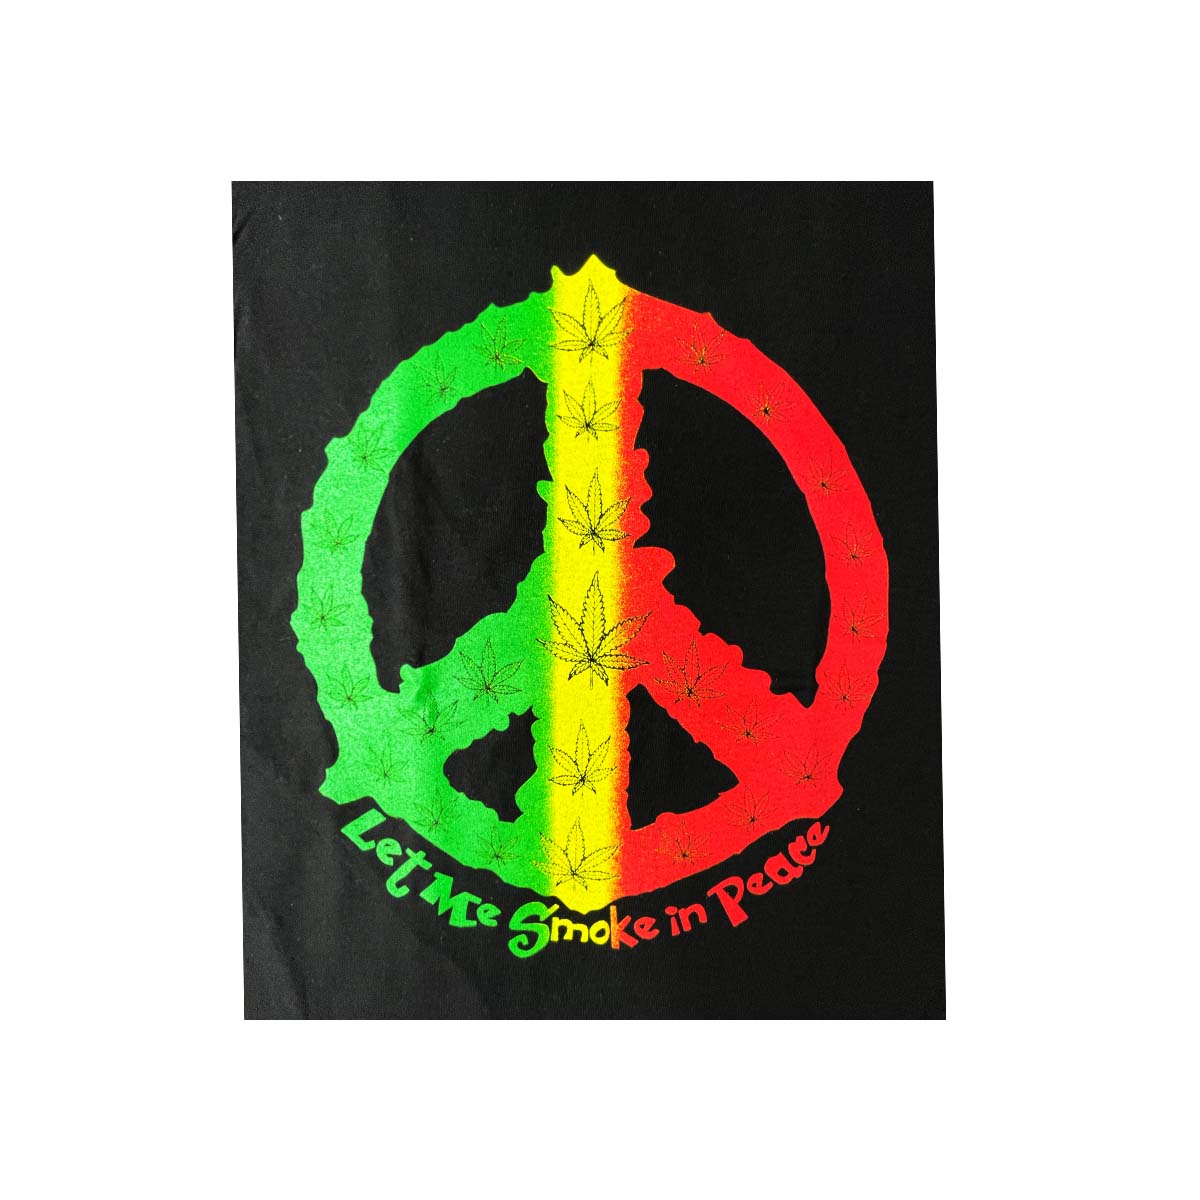 Smoke in Peace 100% Cotton T-Shirt, Pack of 5 Units, S, M, L, XL, XXL